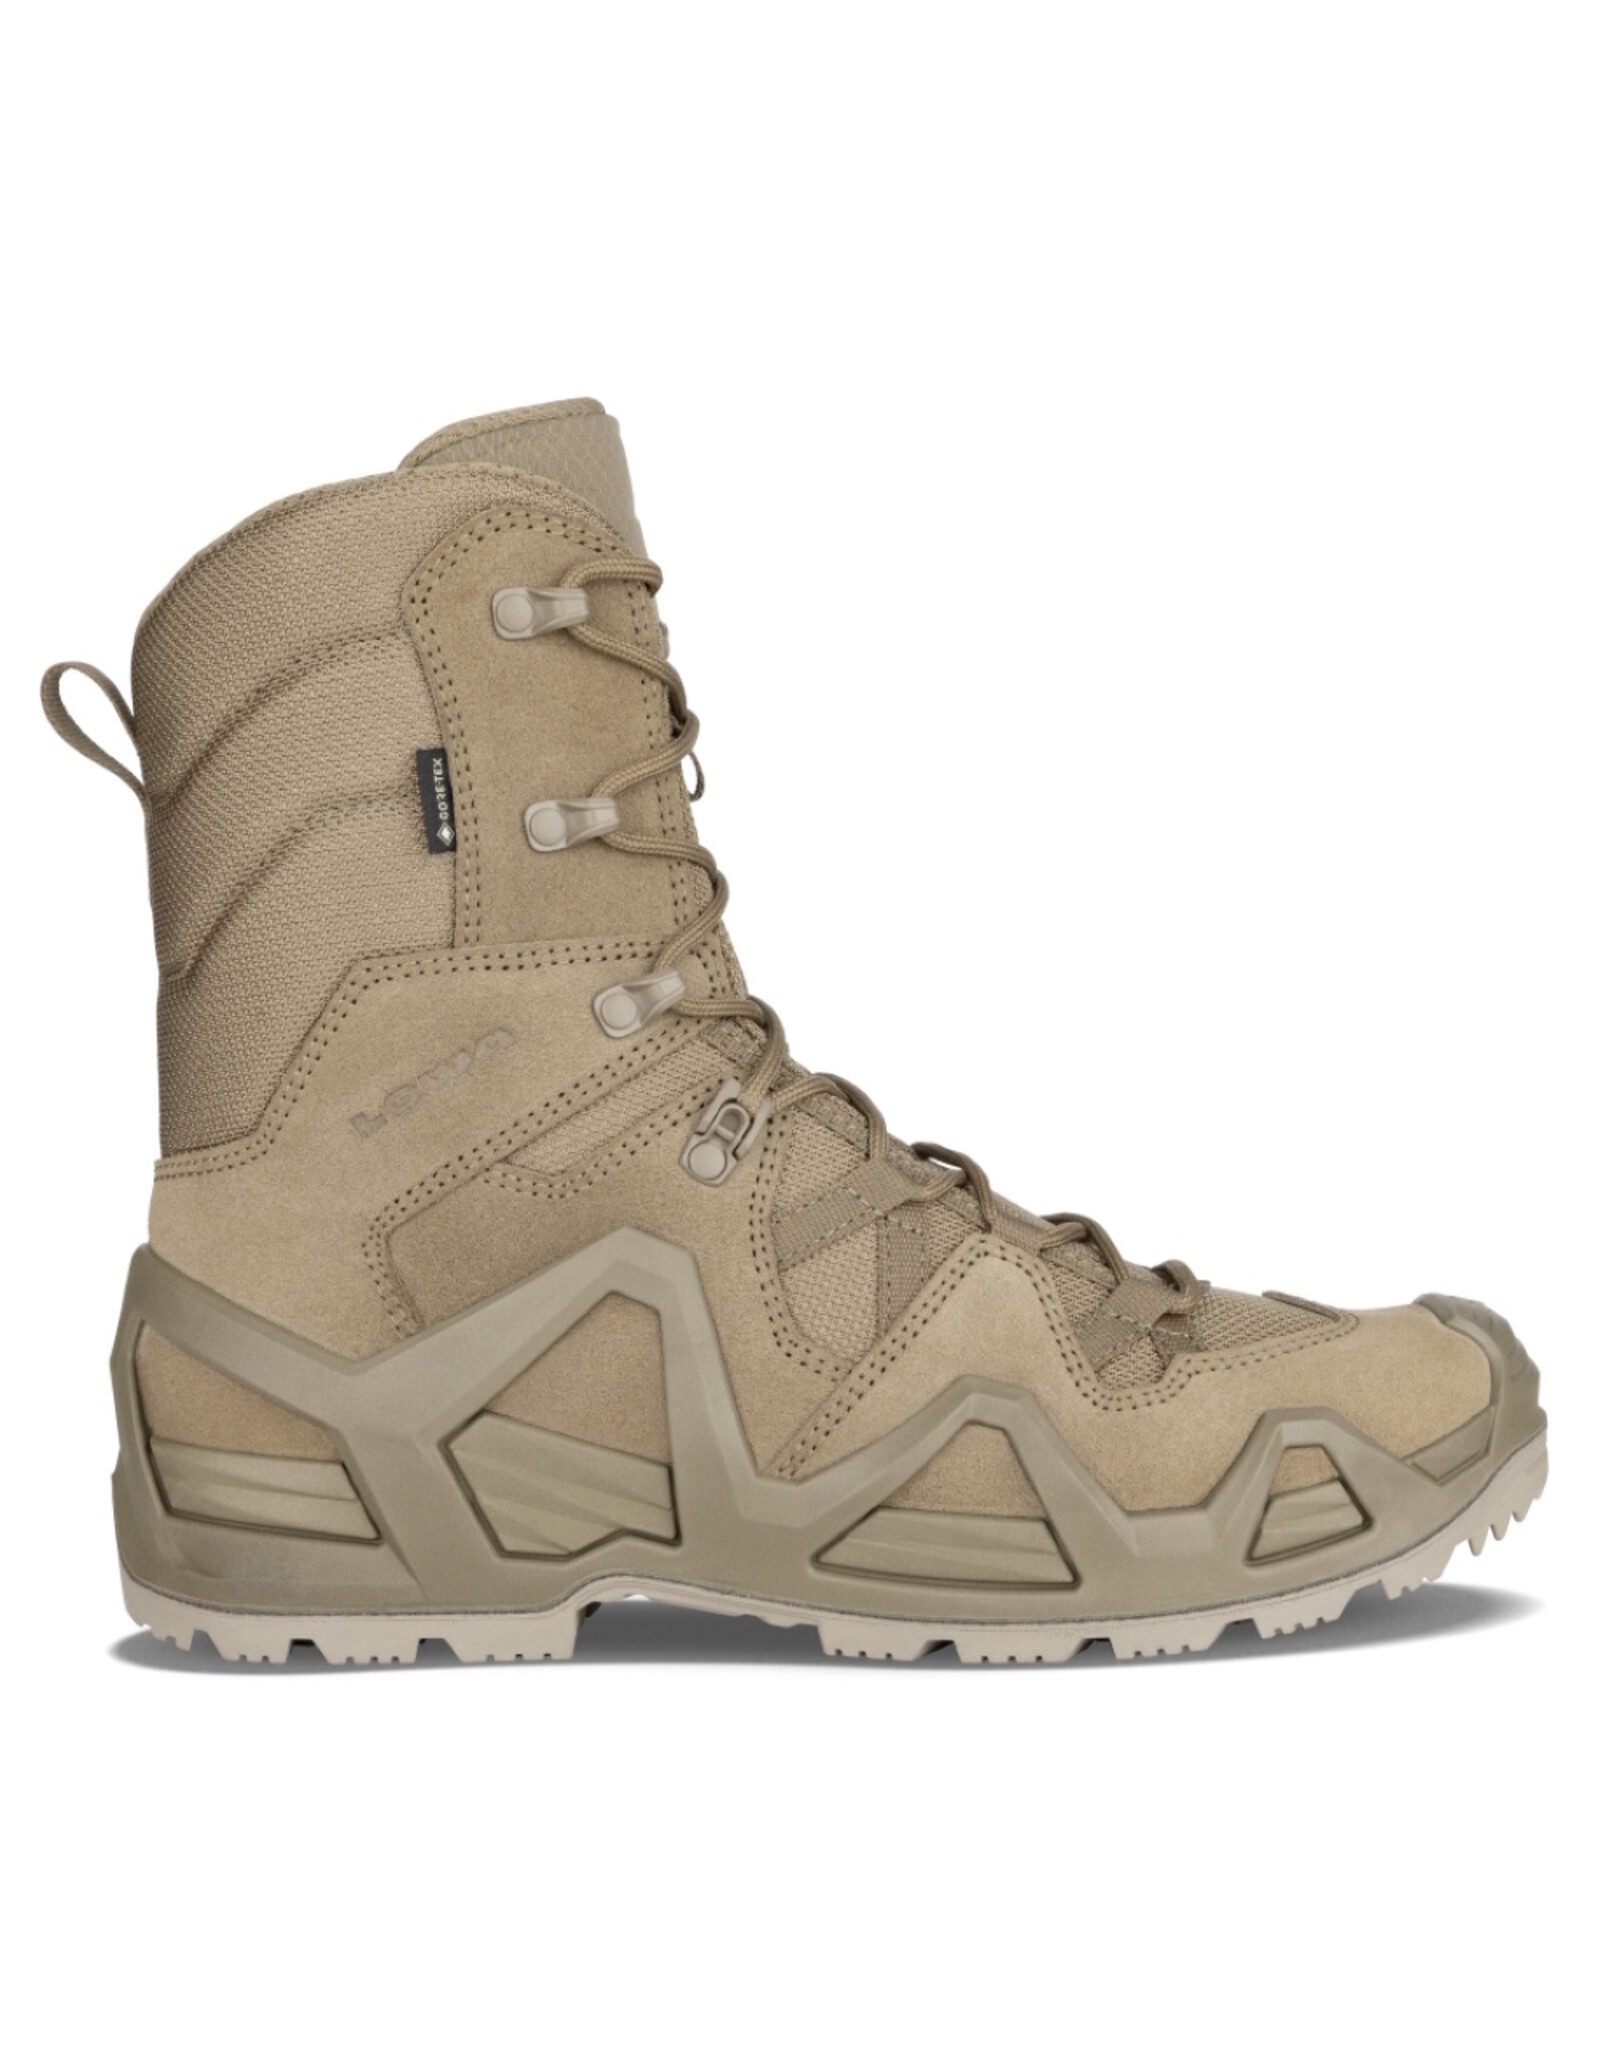 TACTICAL BOOTS - Smith Army Surplus